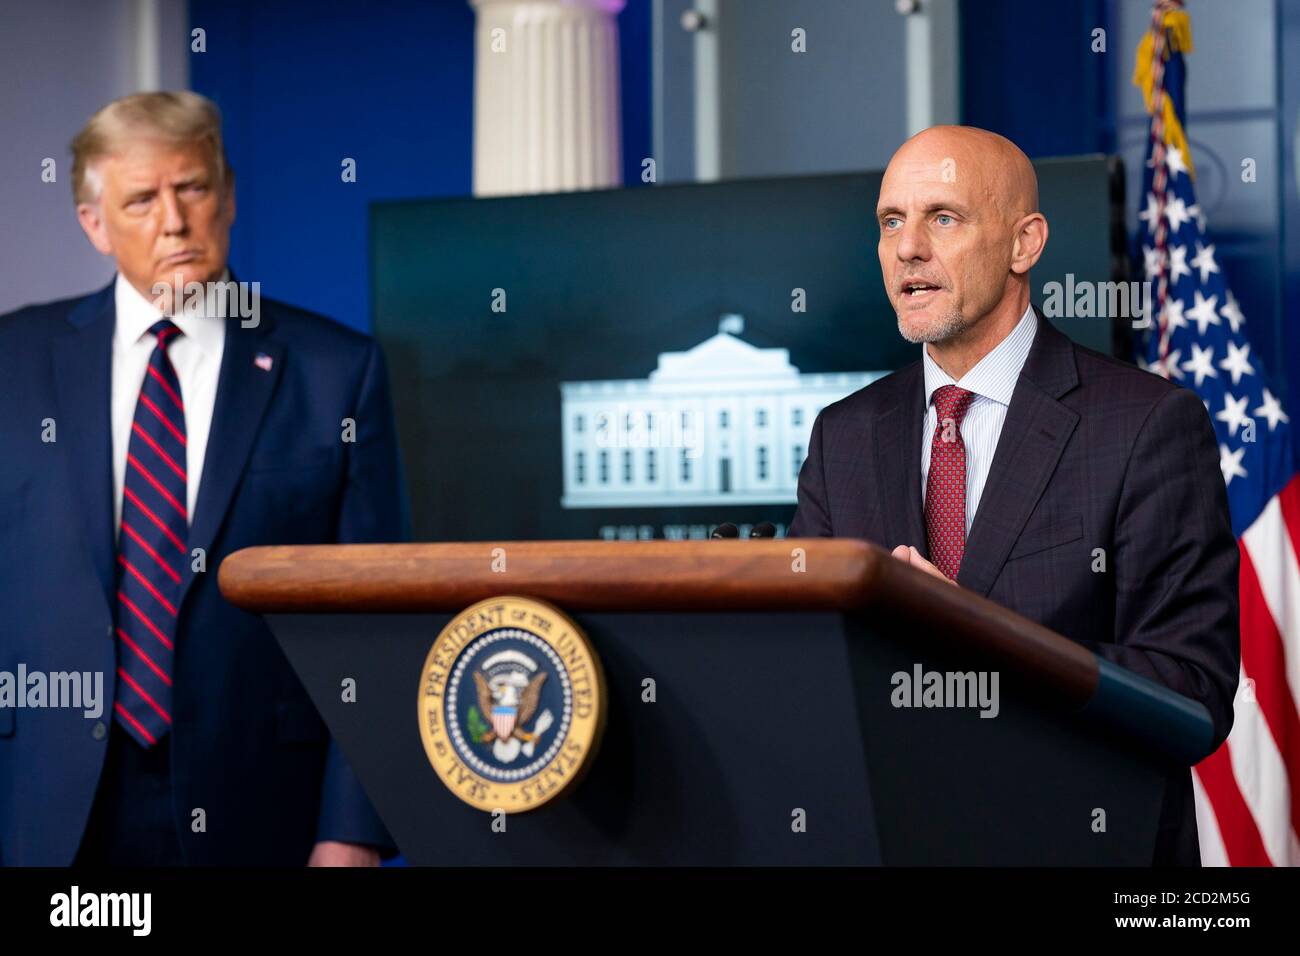 WASHINGTON DC, USA - 23 August 2020 - US President Donald J Trump, joined by Secretary of Health and Human Services Alex Azar and Commissioner of the Stock Photo